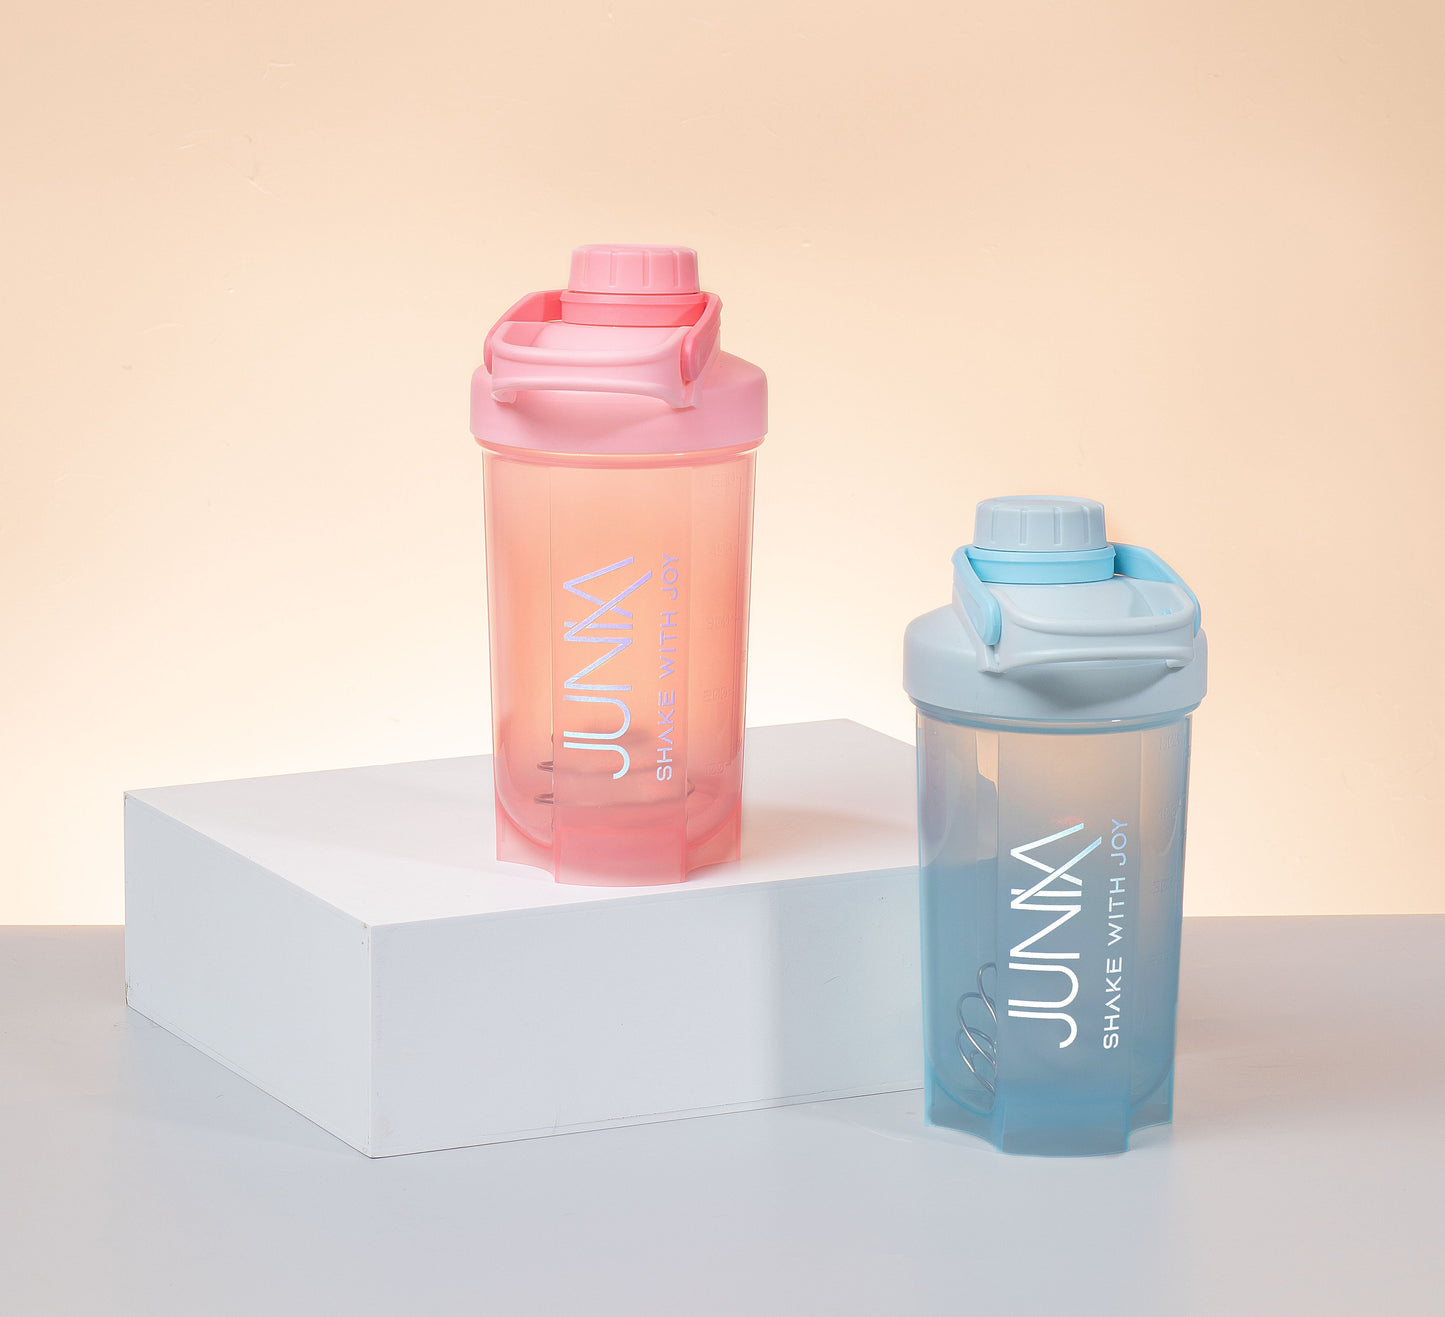 Limited-time three-box discount set [optional flavor + free water bottle!]